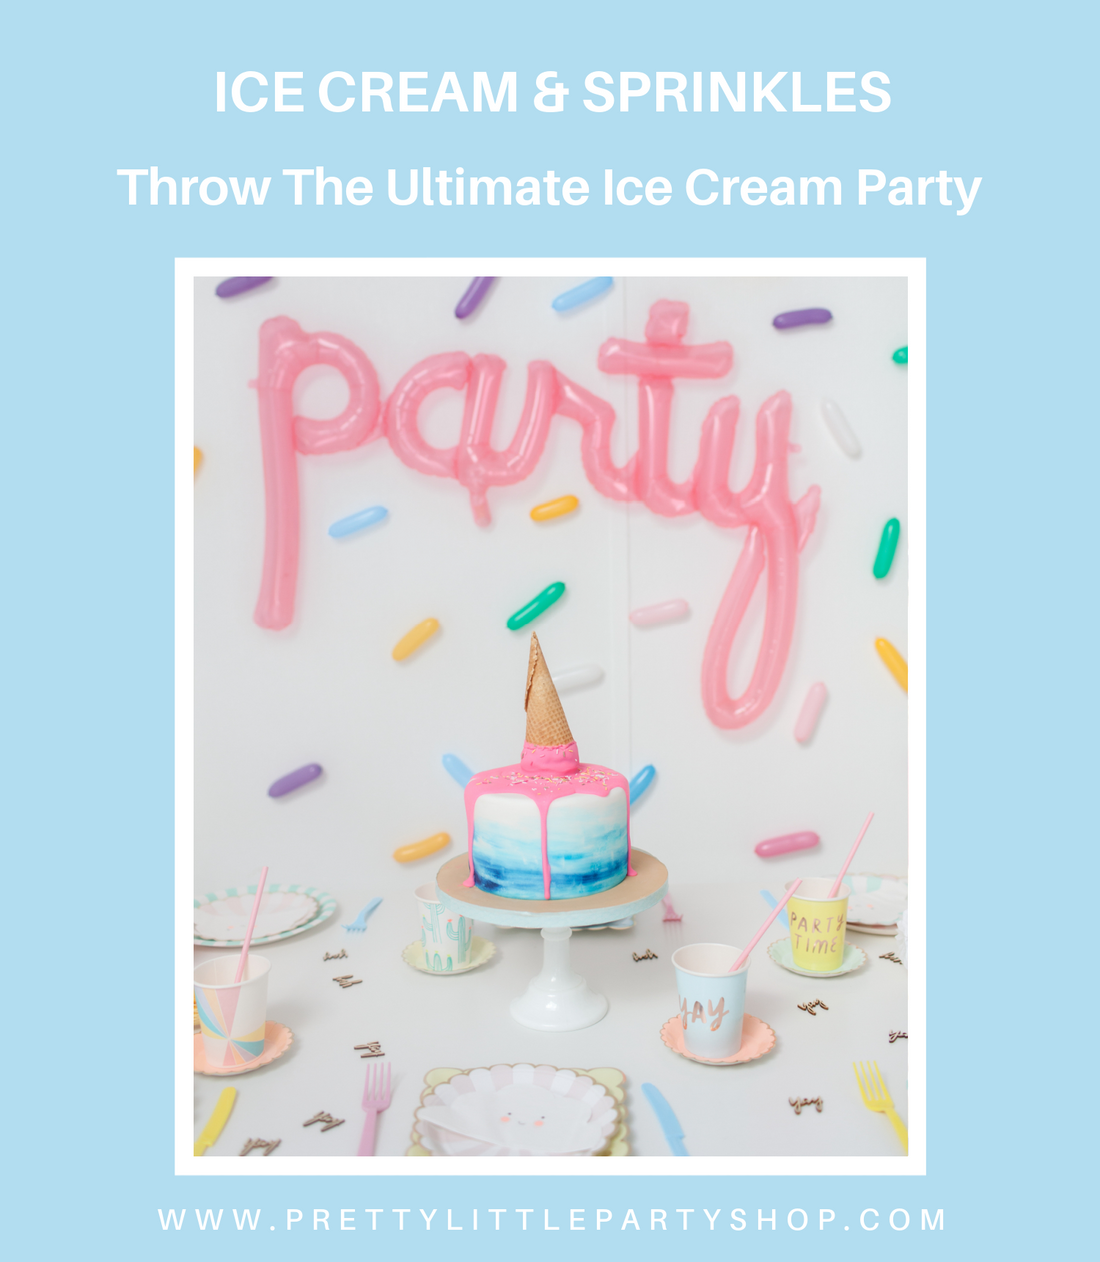 Ice Cream and Sprinkle Party Ideas & How To